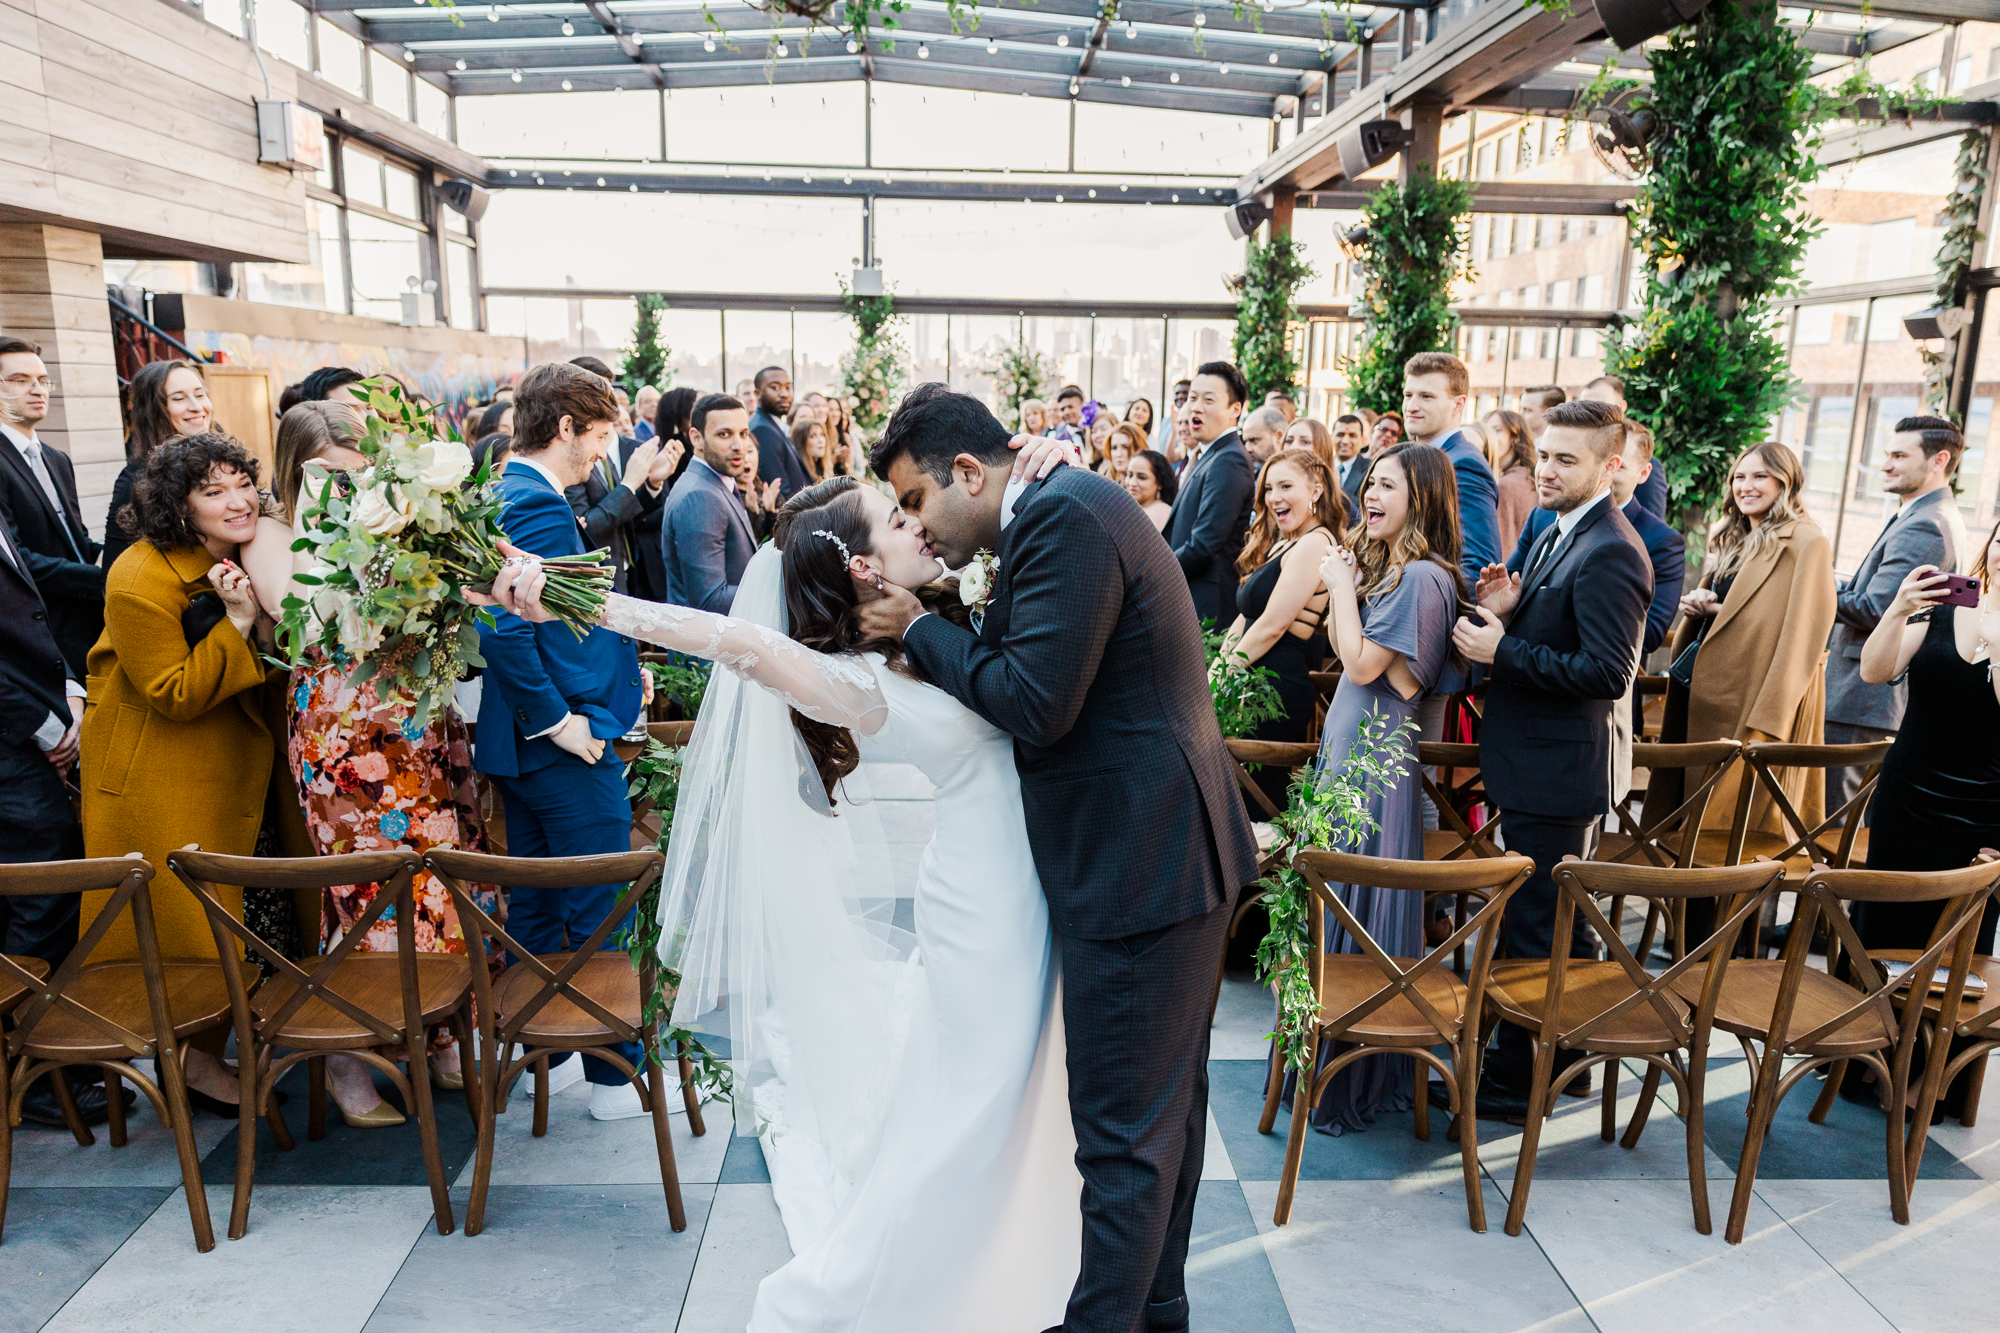 Vibrant 74Wythe Wedding Photography in Wintery Brooklyn with Rooftop Views